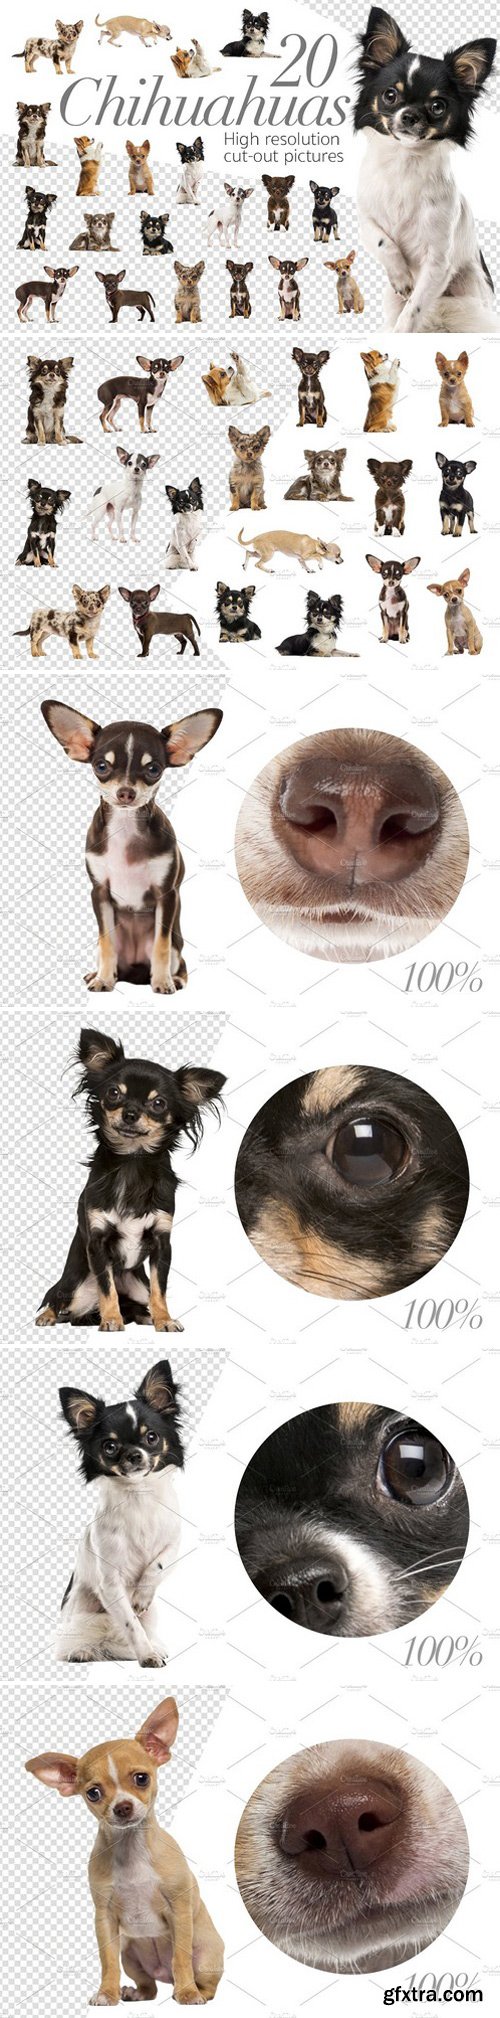 CM - 20 Chihuahuas - Cut-out Pictures 2042332